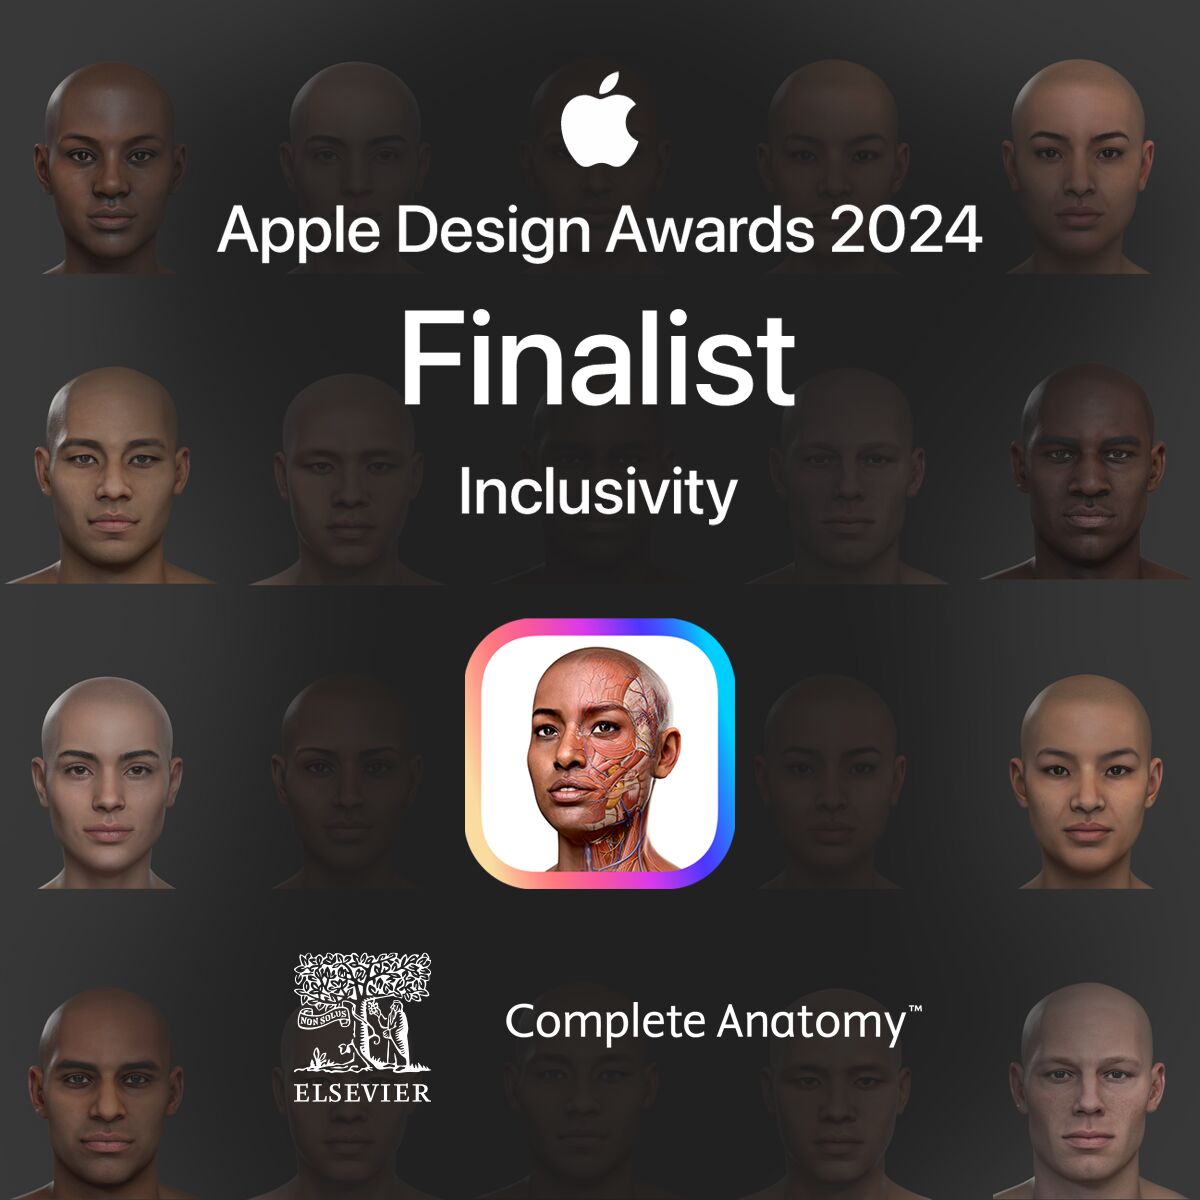 We are delighted to share that @CompleteAnatomy is a finalist for the @Apple Design Award for Inclusivity! The winners will be announced on June 10 at Apple’s Worldwide Developers Conference. #CompleteAnatomy #WWDC24